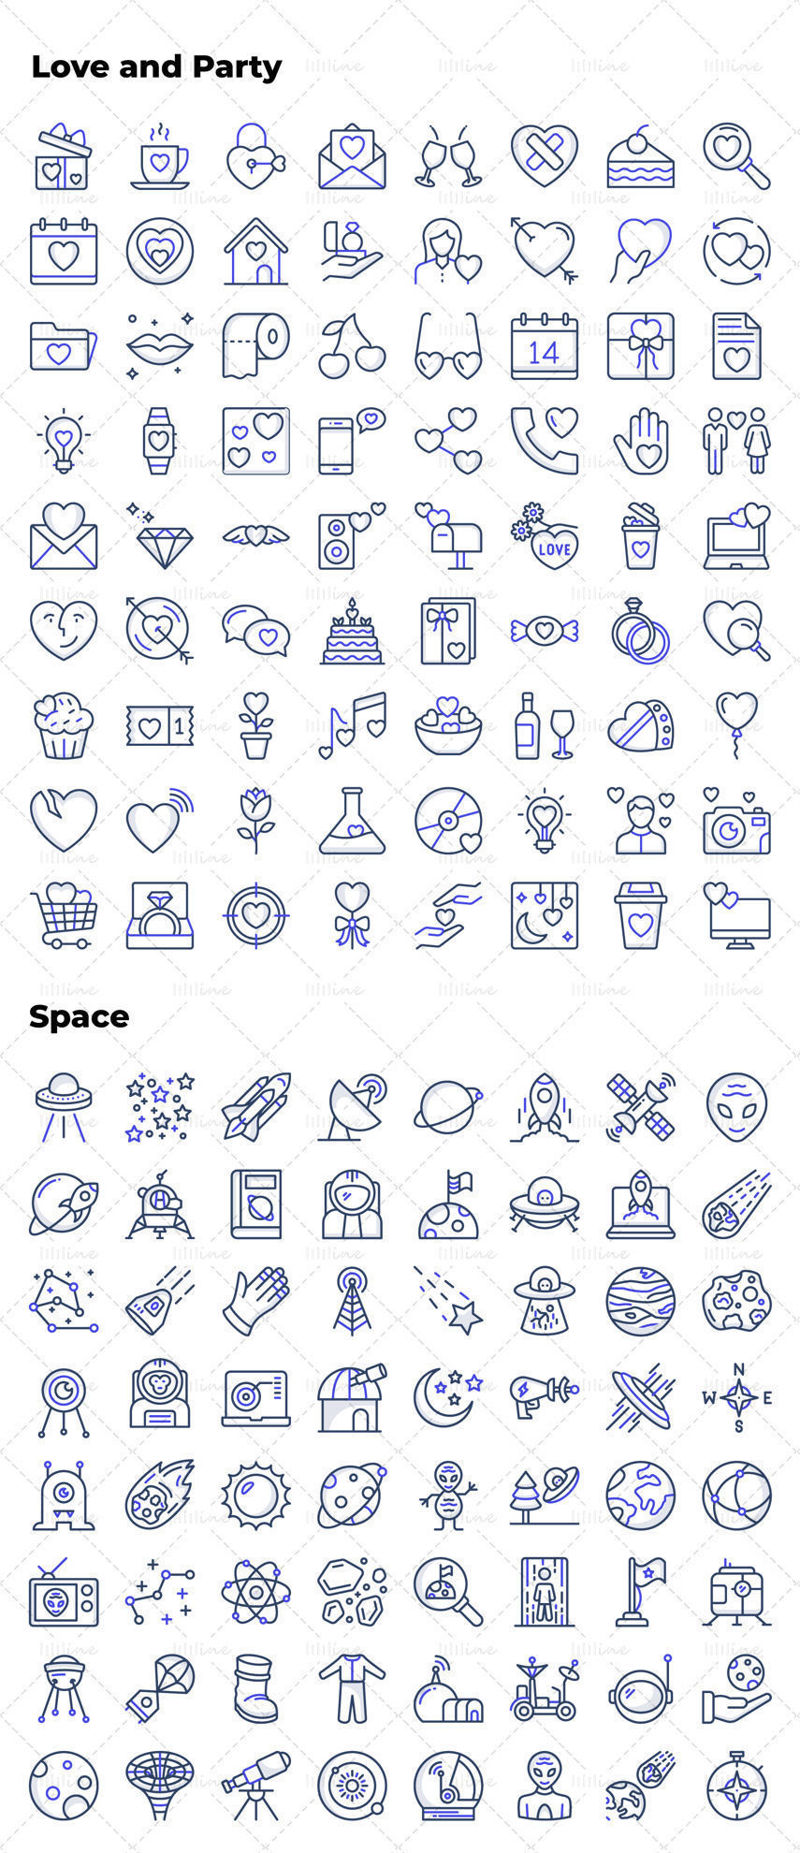 Love party, space vector icon